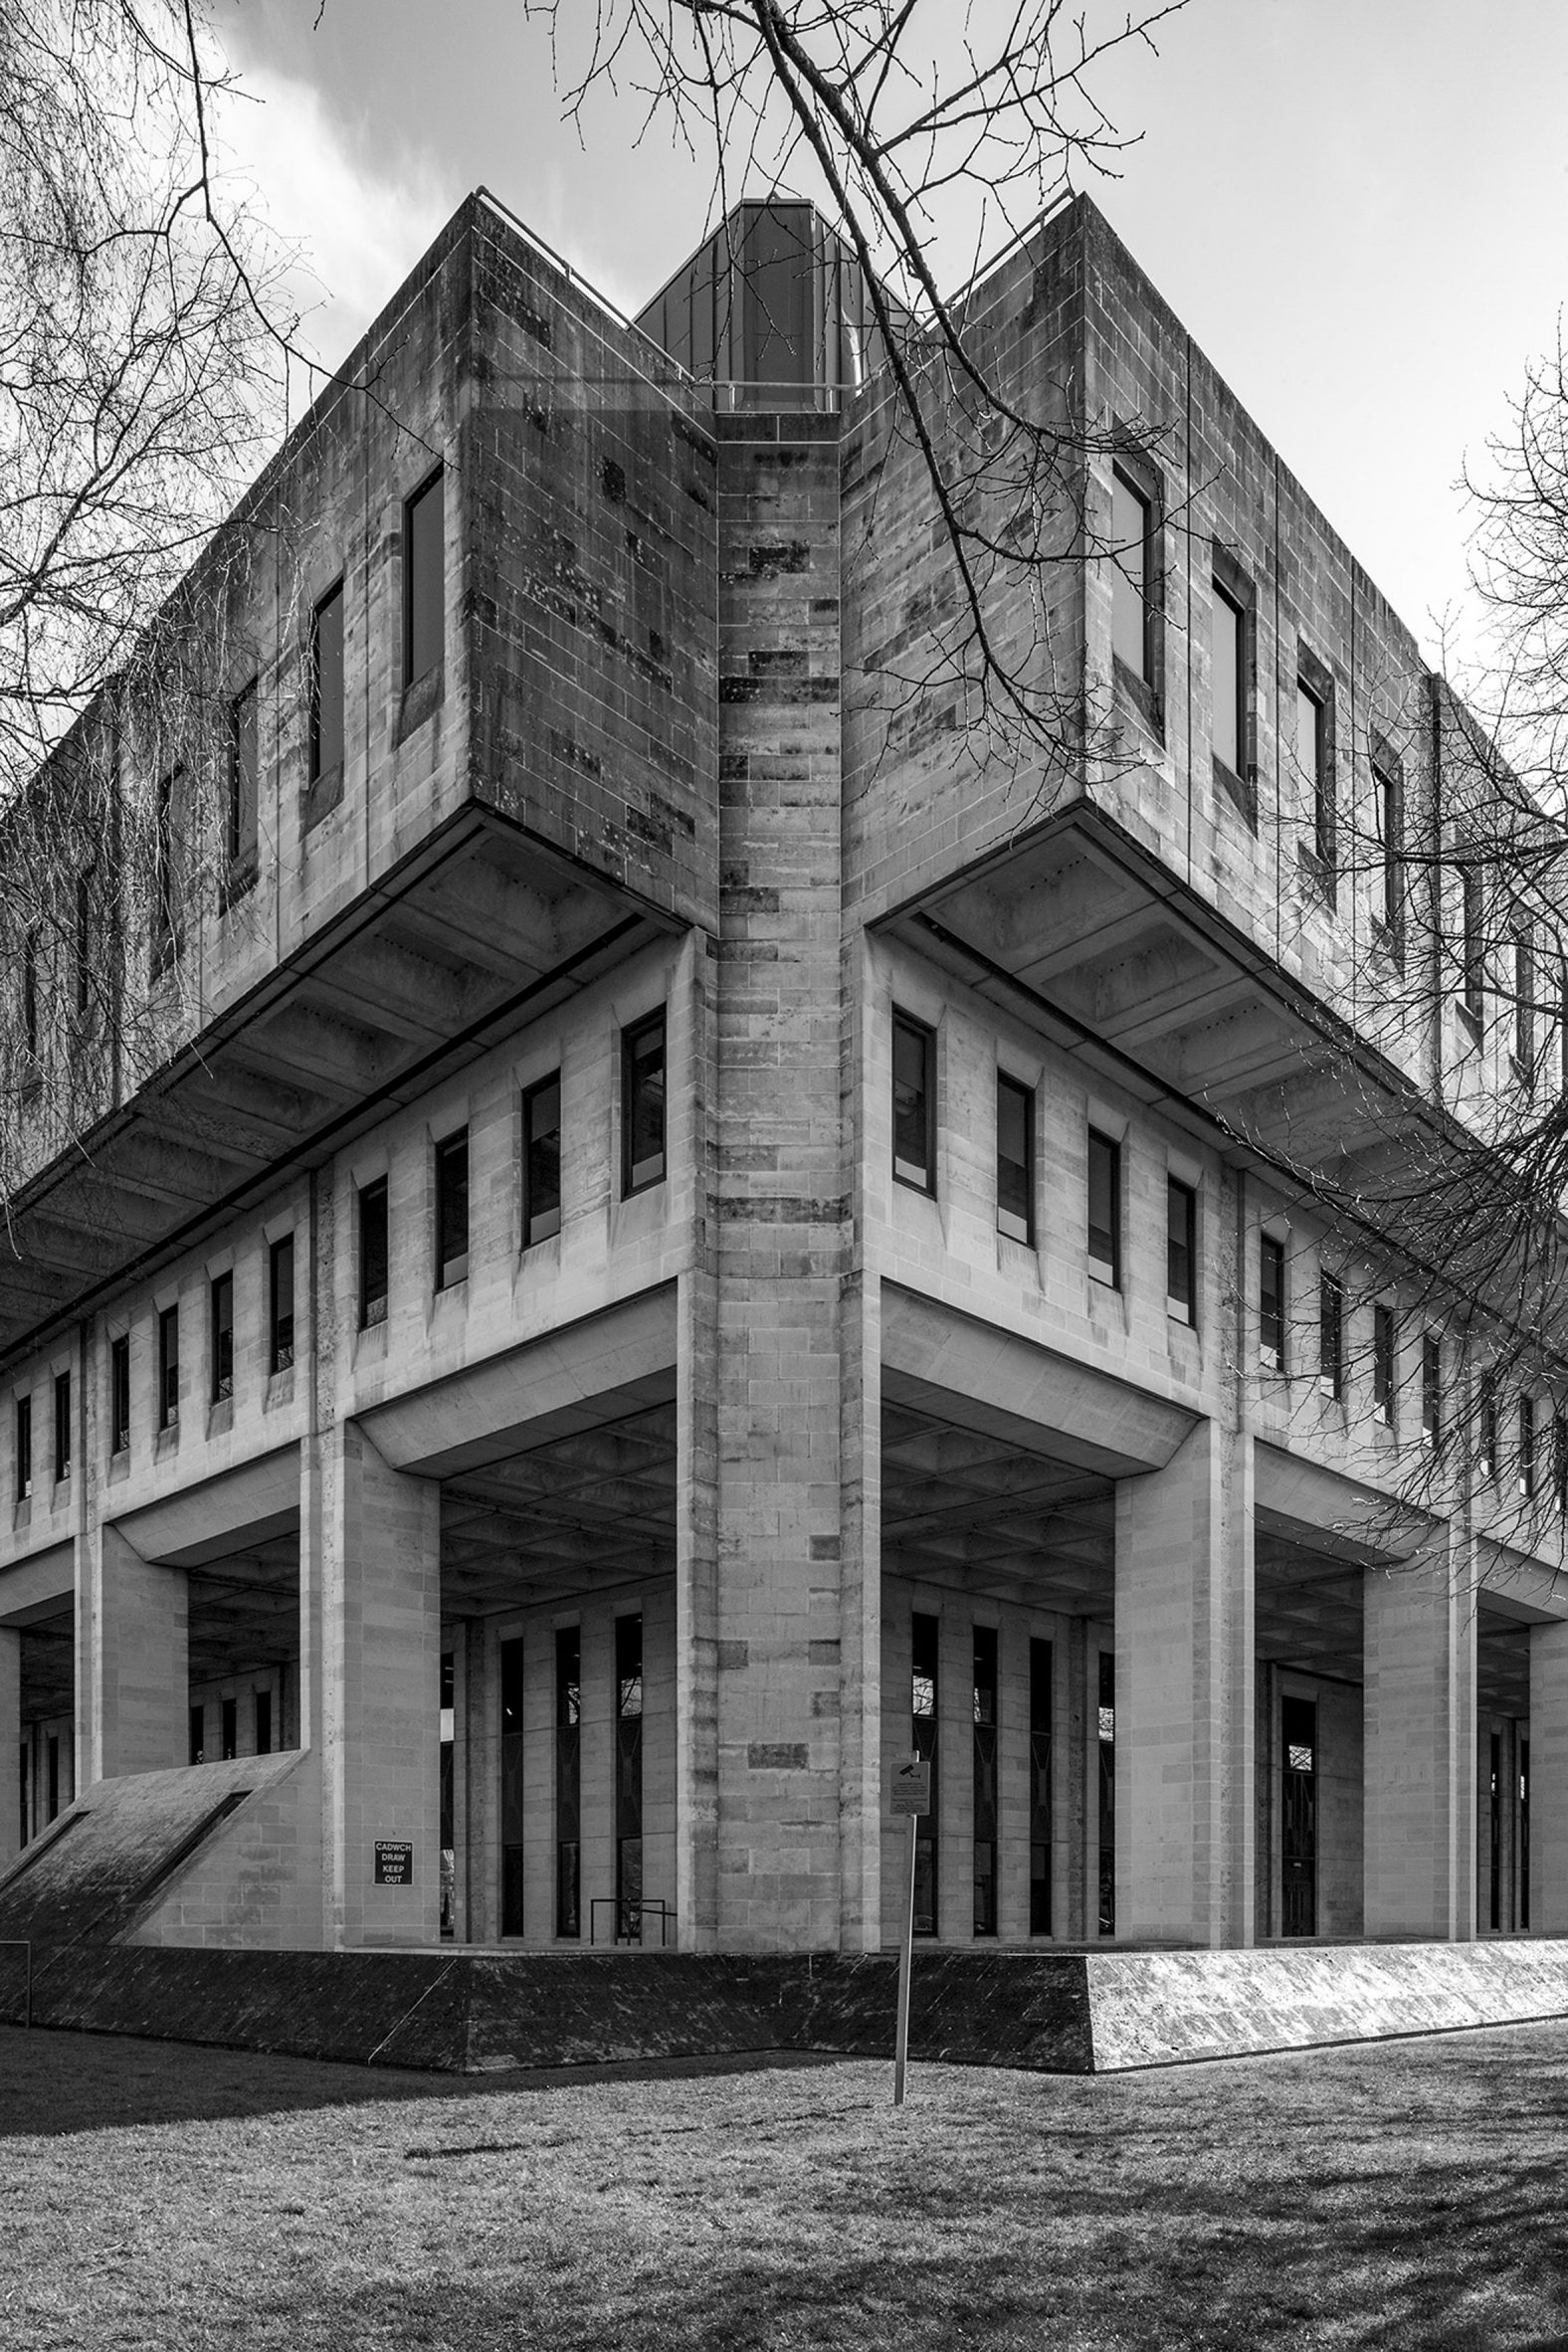 The Crown Buildings in Brutal Wales book by Simon Phipps